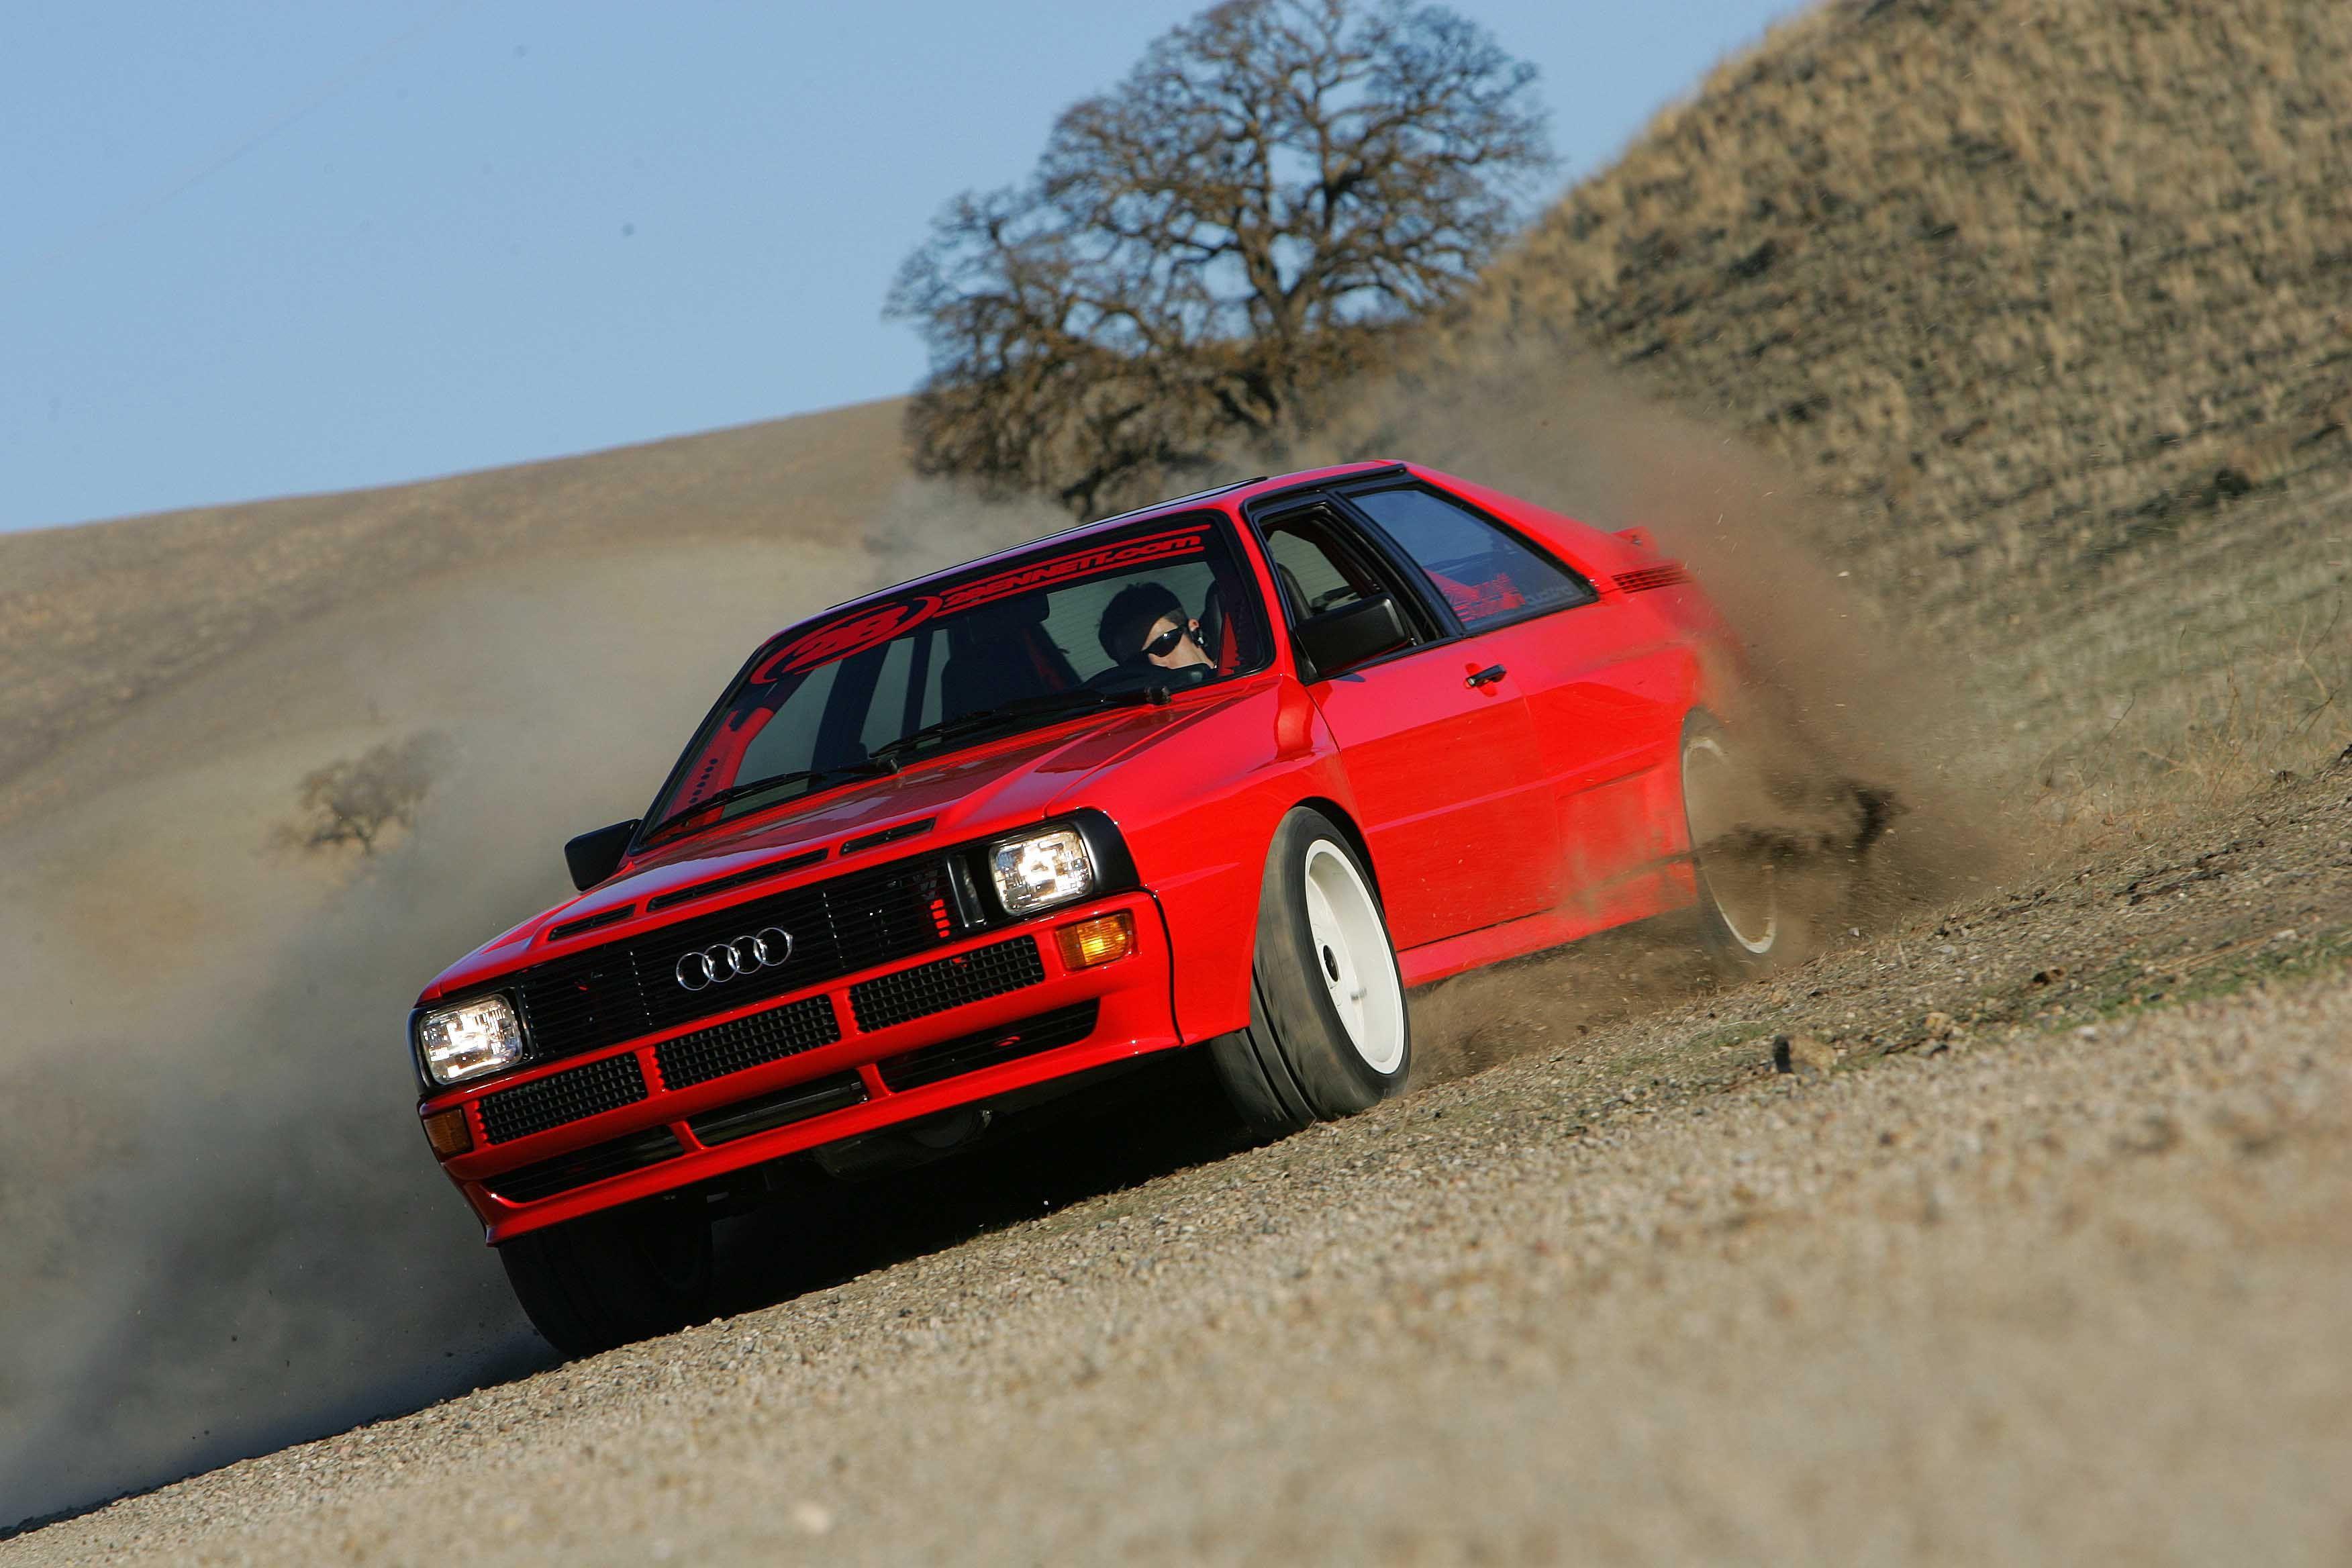 The design of the Audi 80 wallpaper and image